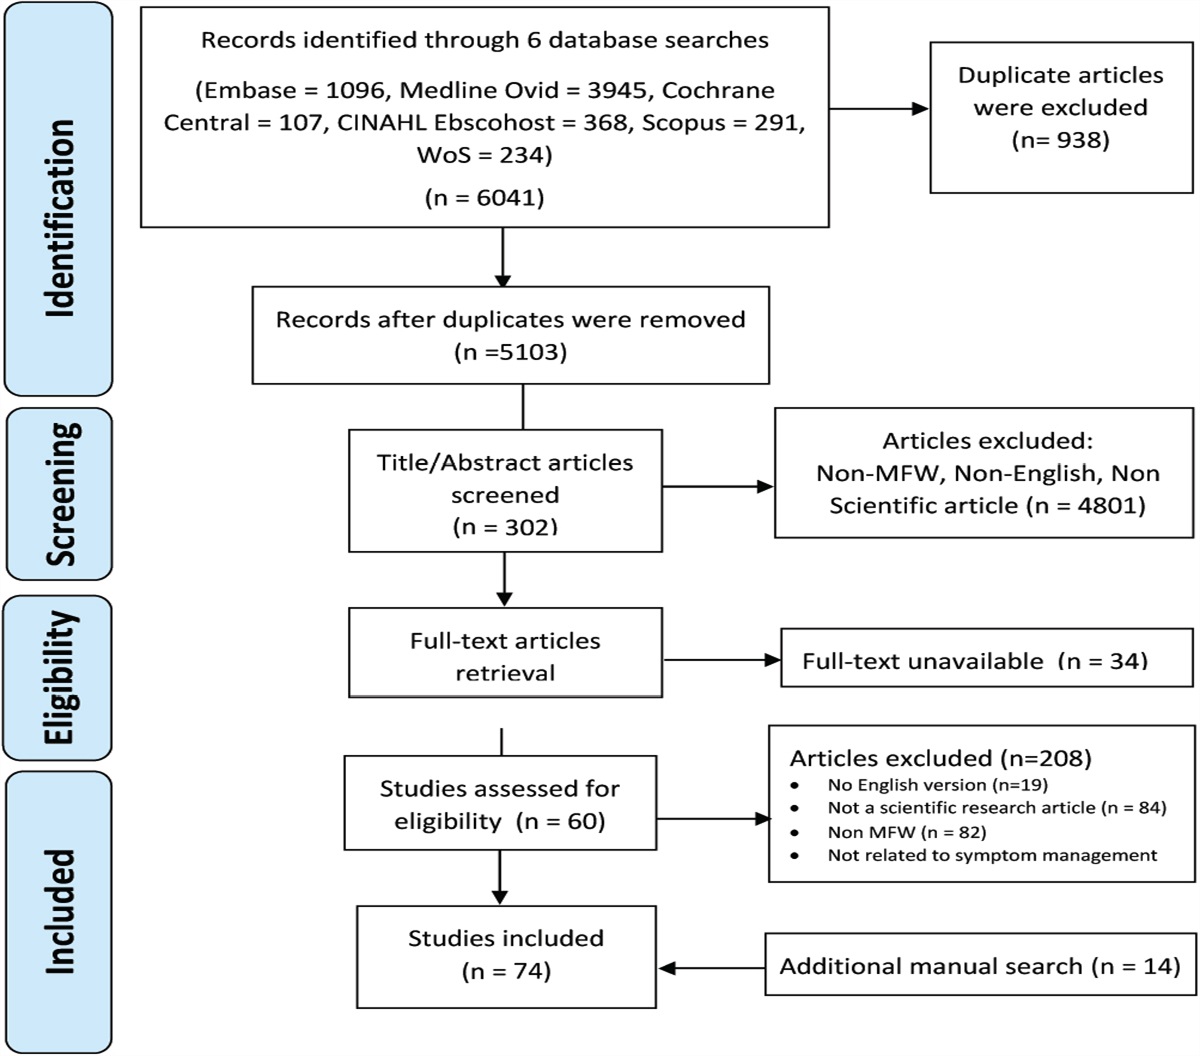 Caring for Patients With Malignant Fungating Wounds: A Scoping Literature Review